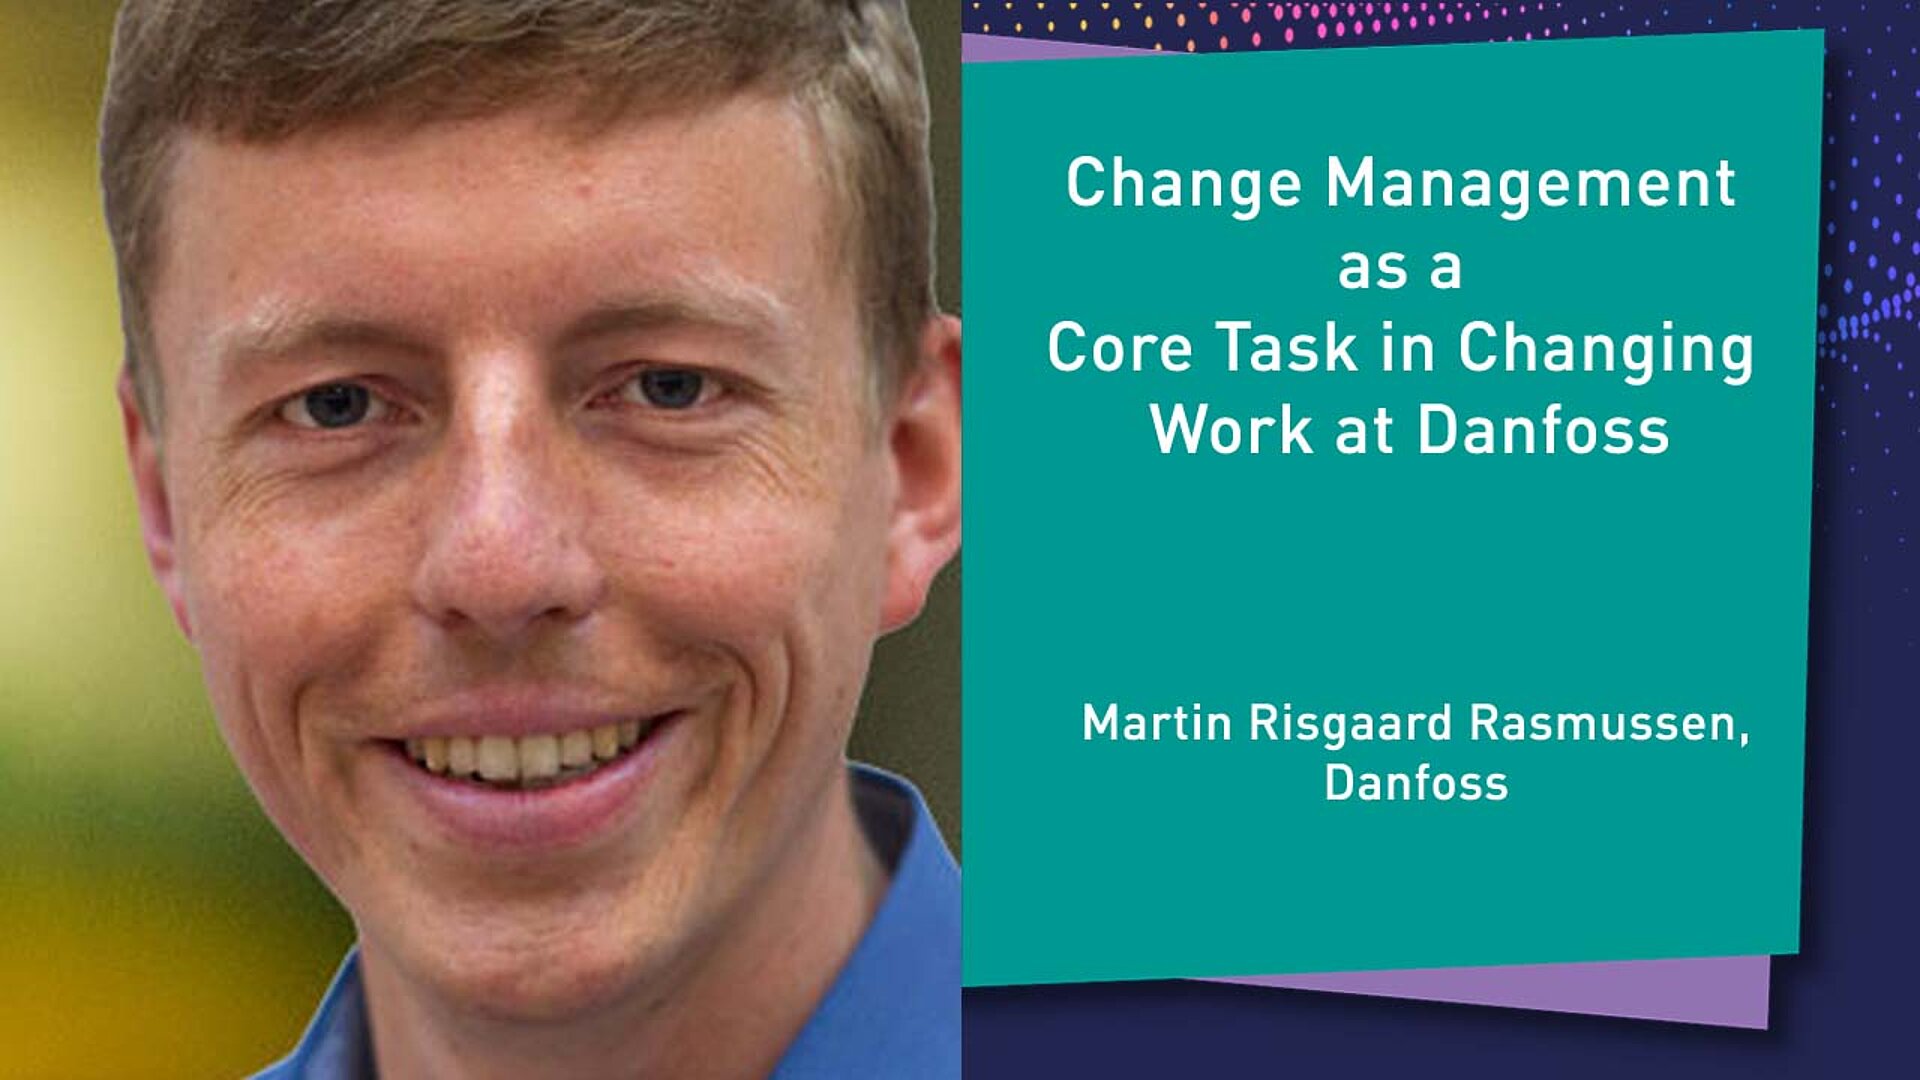 Change Management as a Core Task in Changing Work at Danfoss